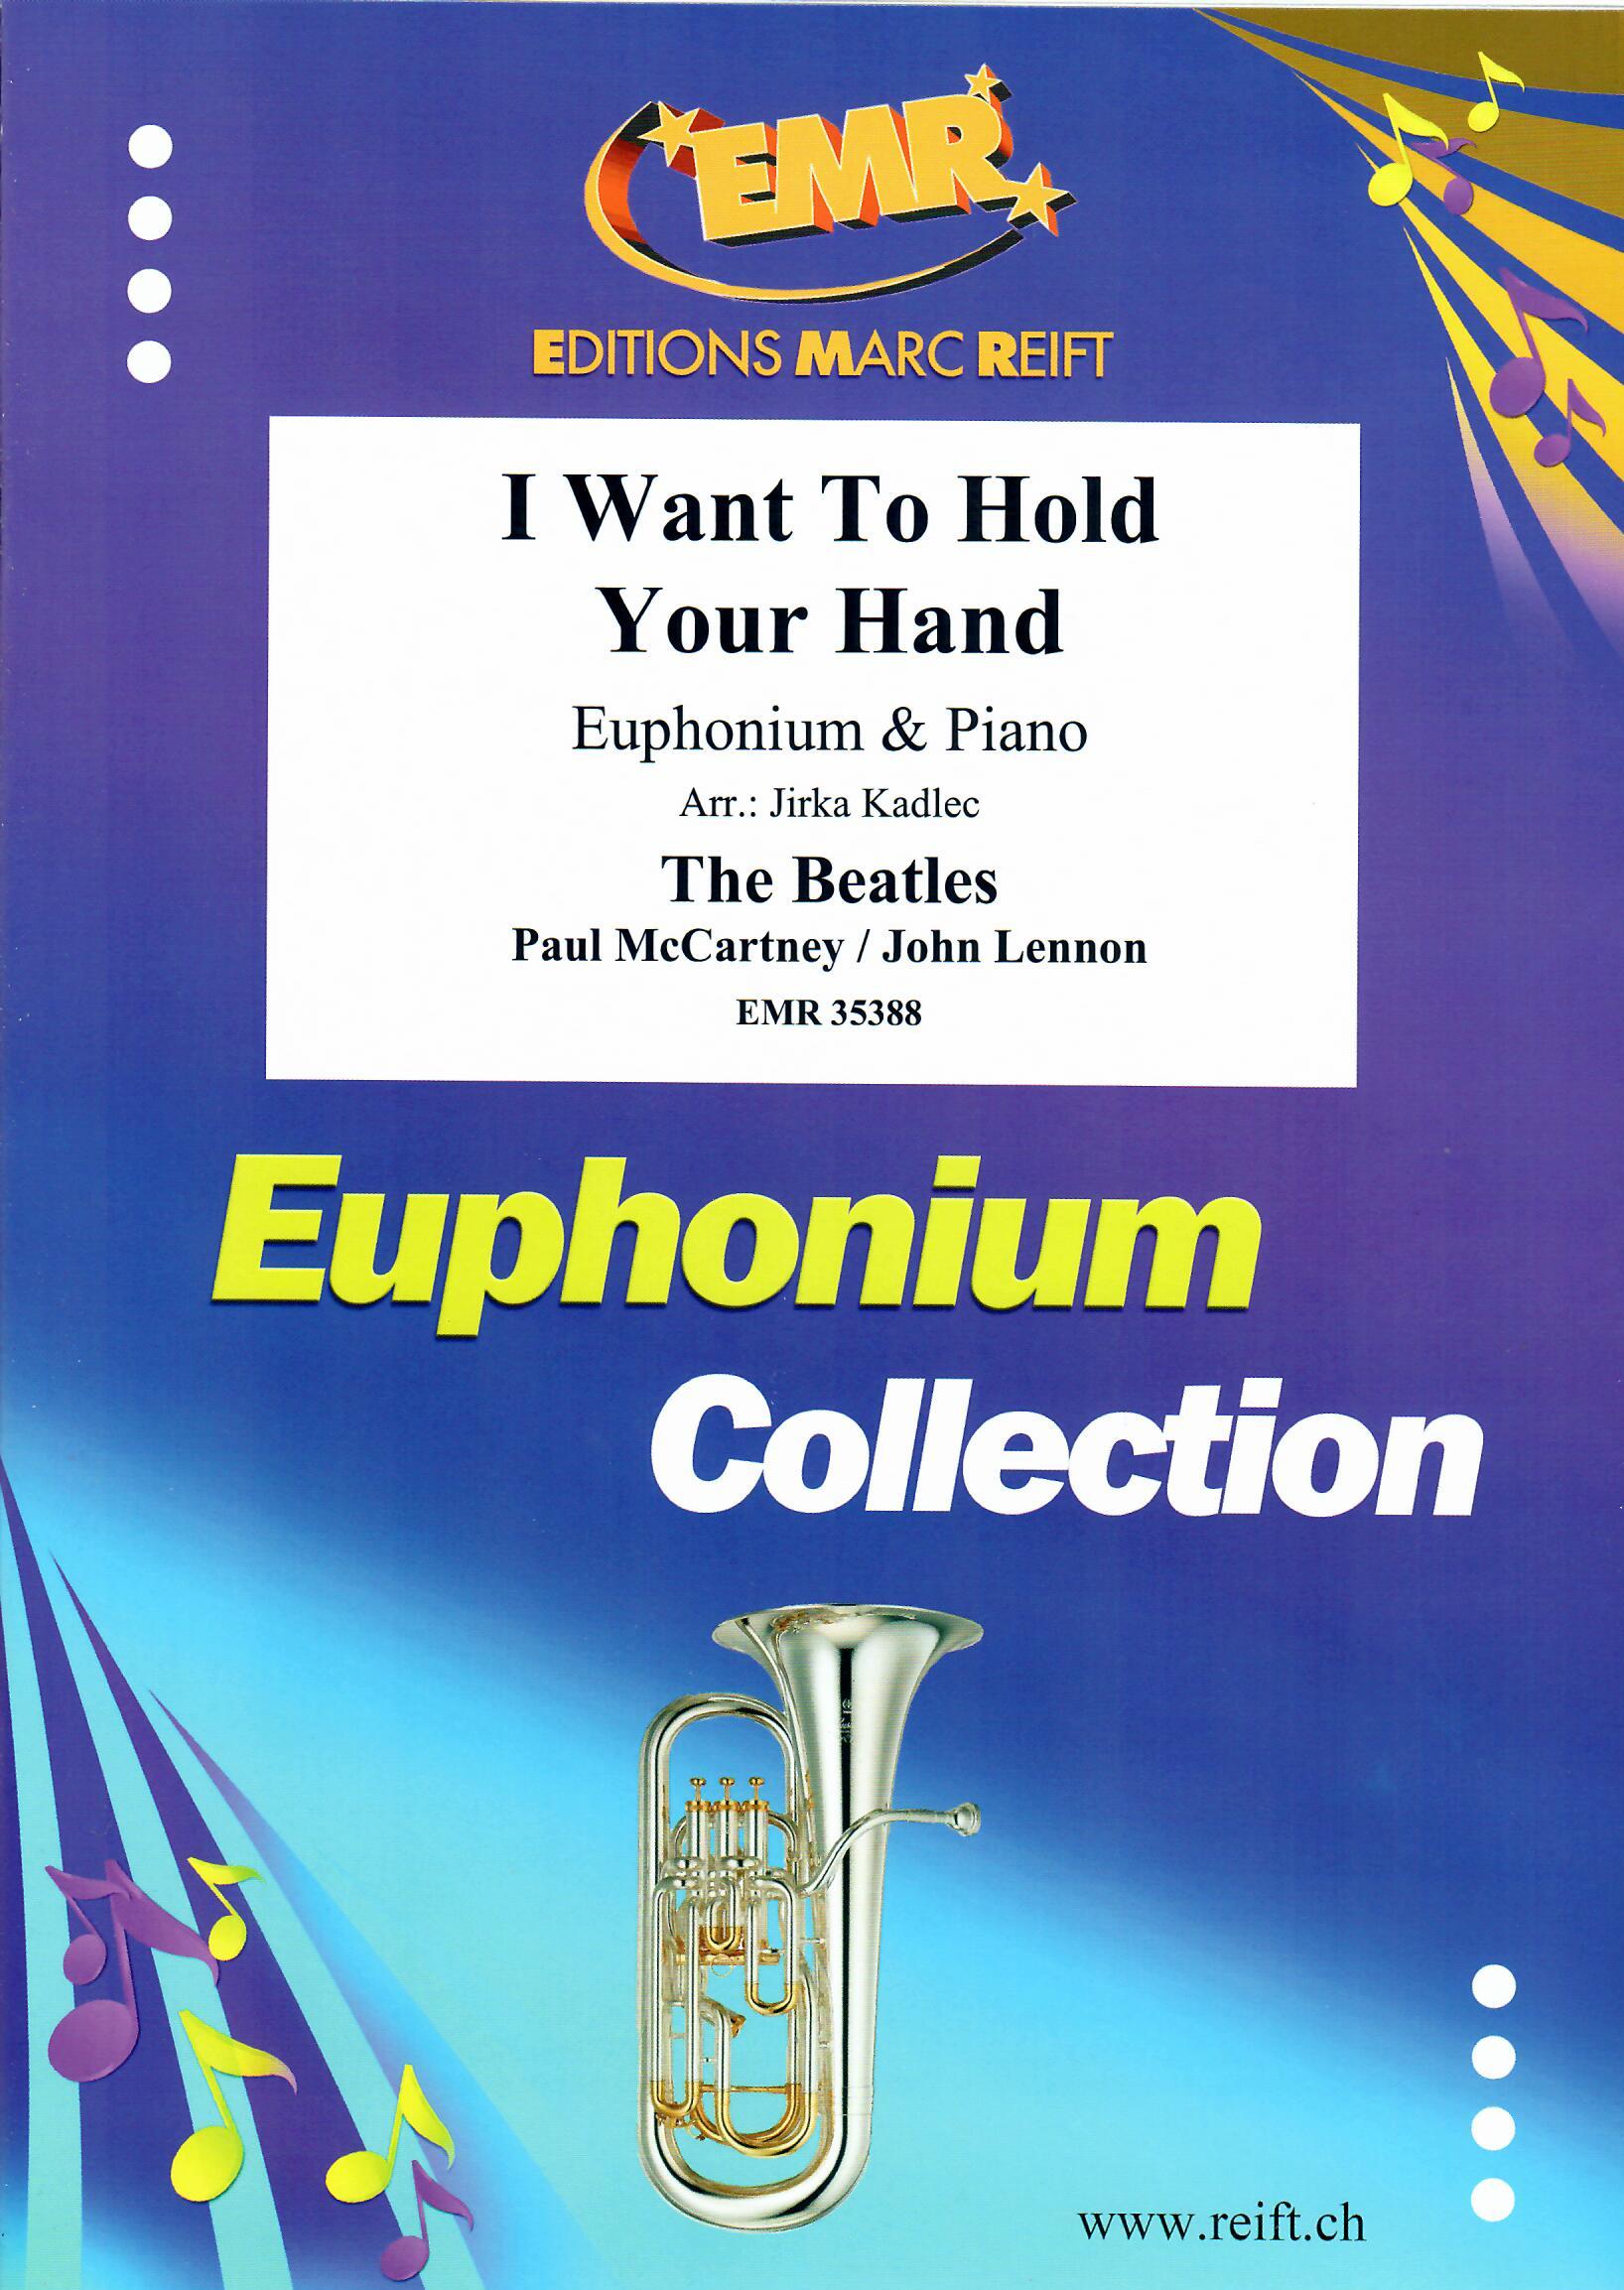 I WANT TO HOLD YOUR HAND, SOLOS - Euphonium